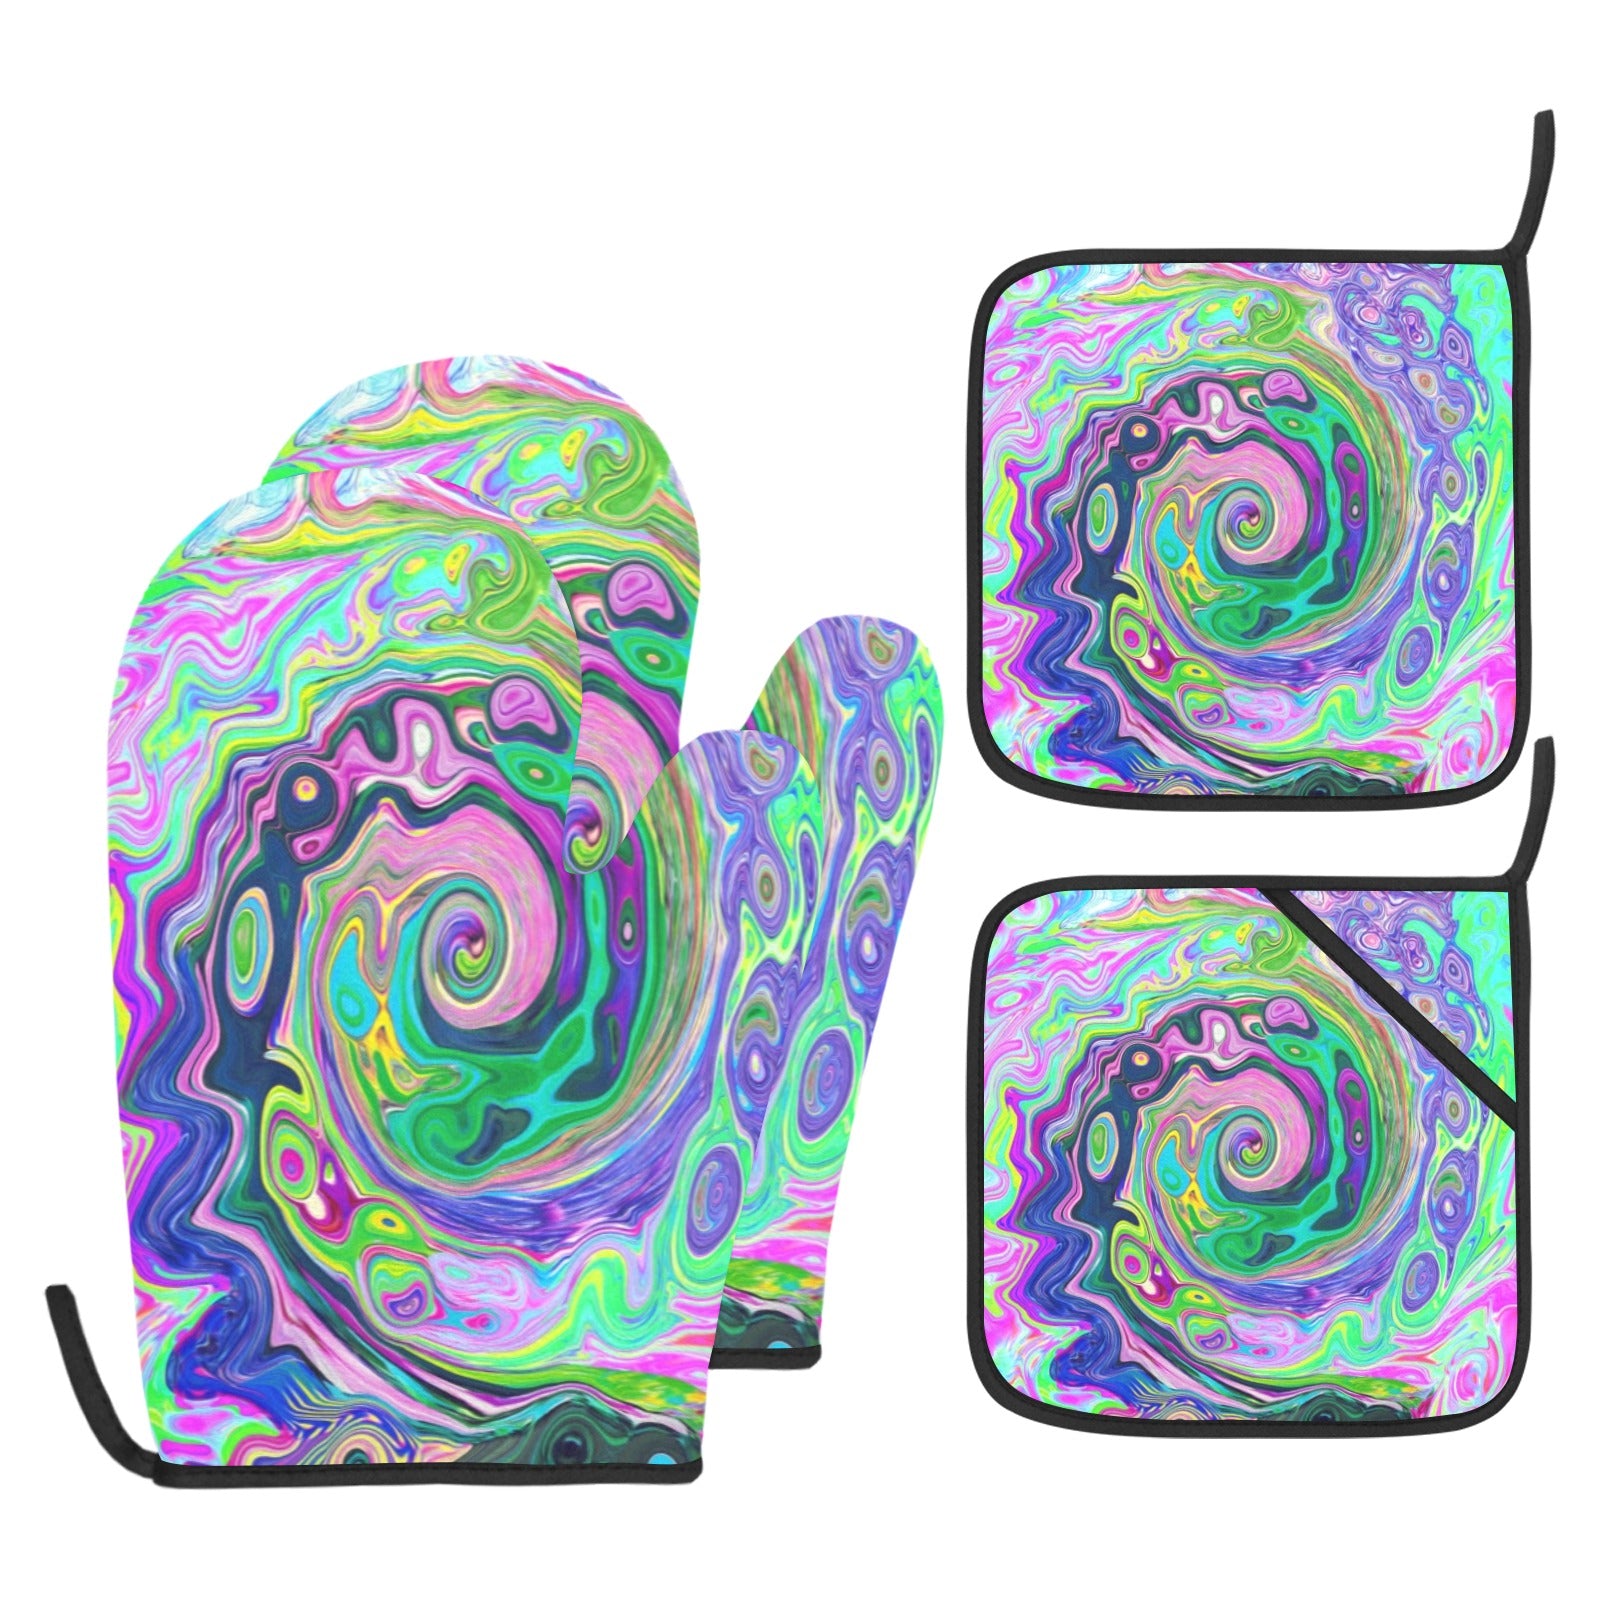 Oven Mitts and Pot Holders Set, Groovy Abstract Aqua and Navy Lava Swirl